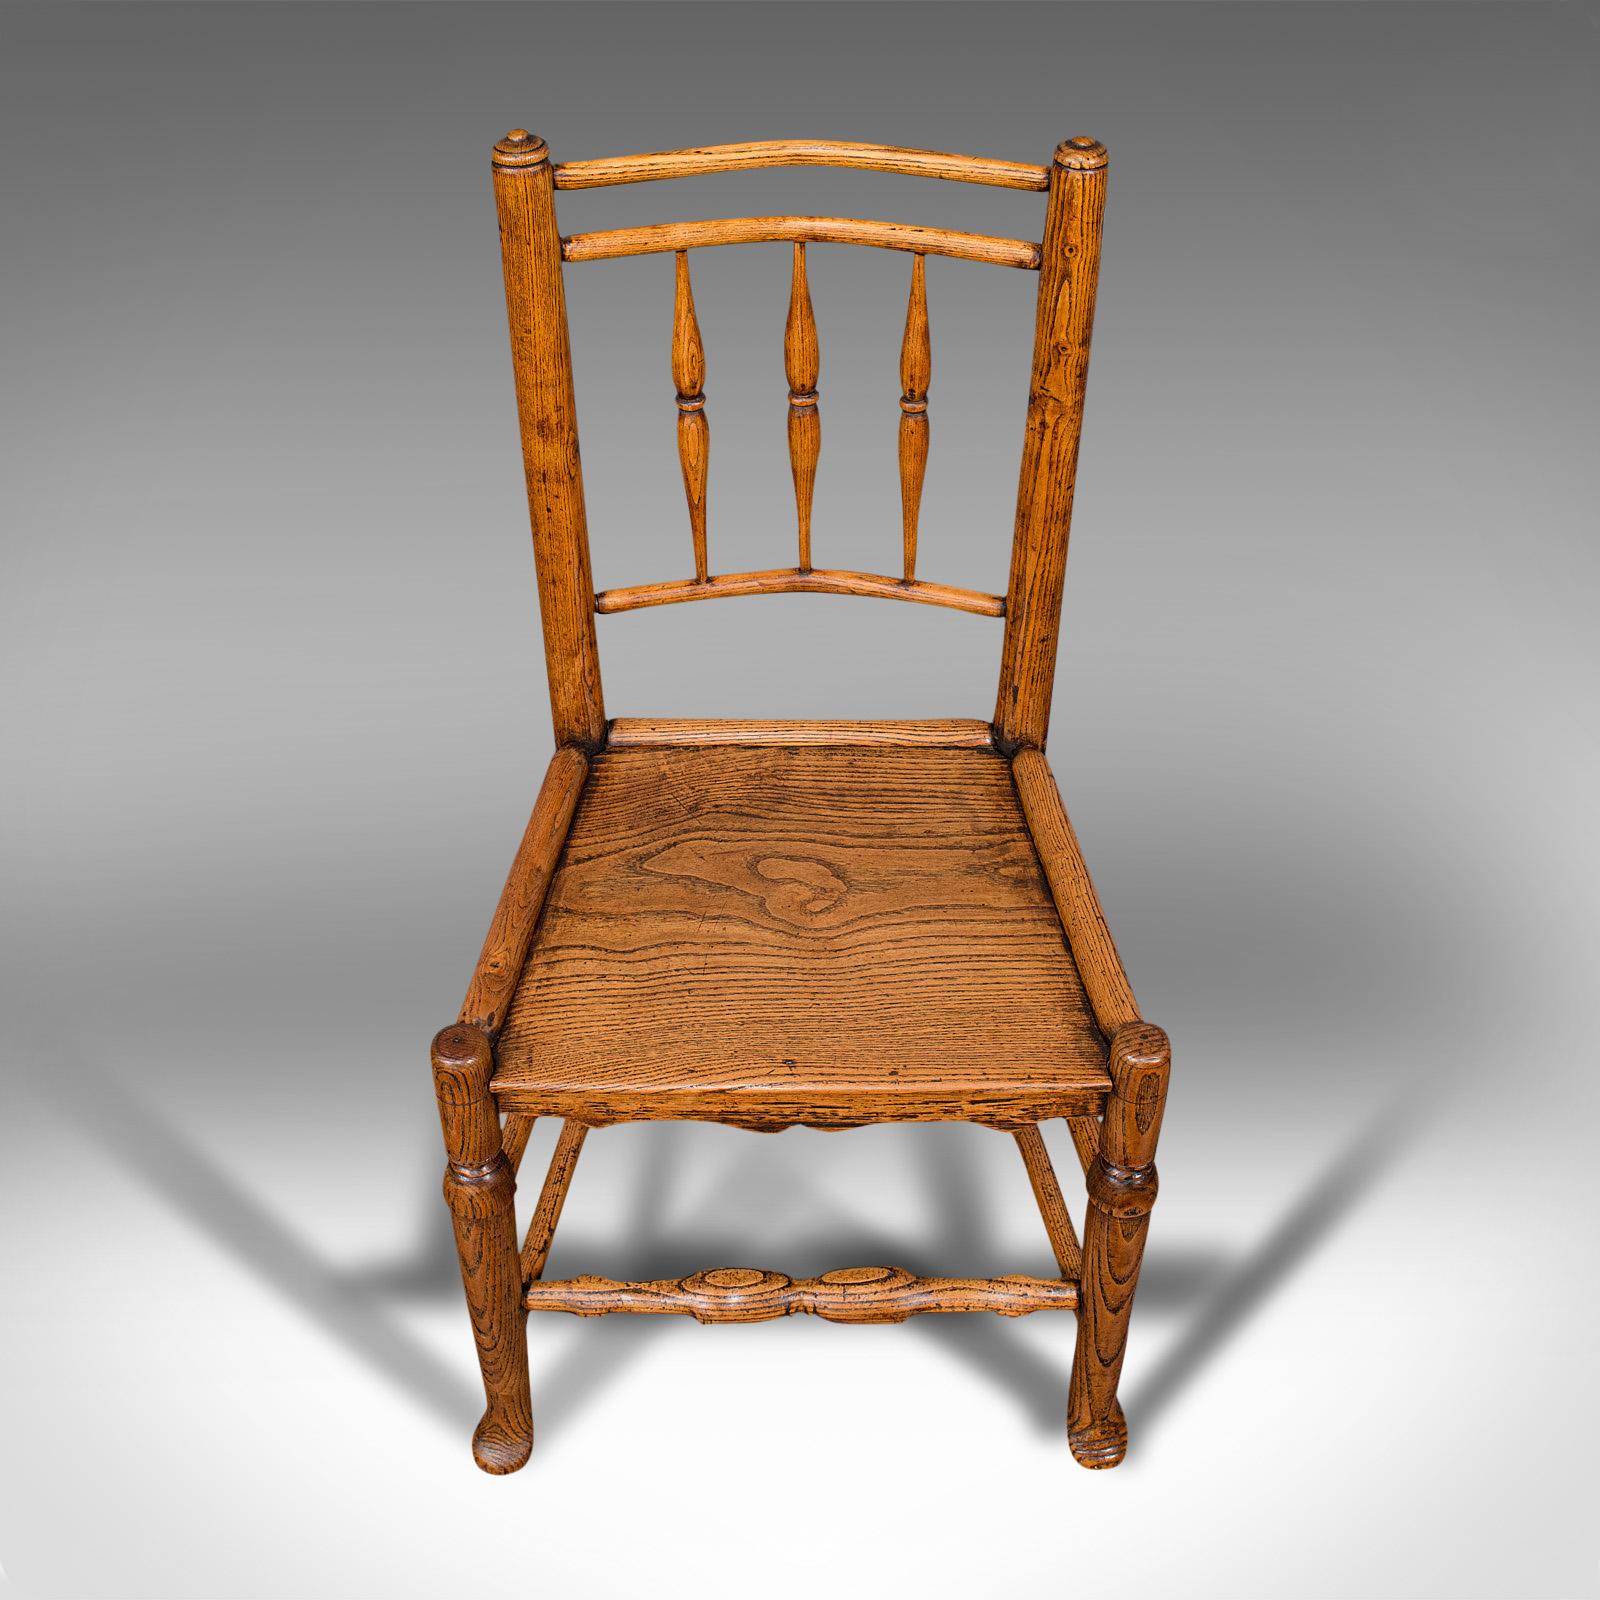 Small Antique Tanner's Chair, English, Ash, Elm, Spindle Back, Seat, Victorian 2